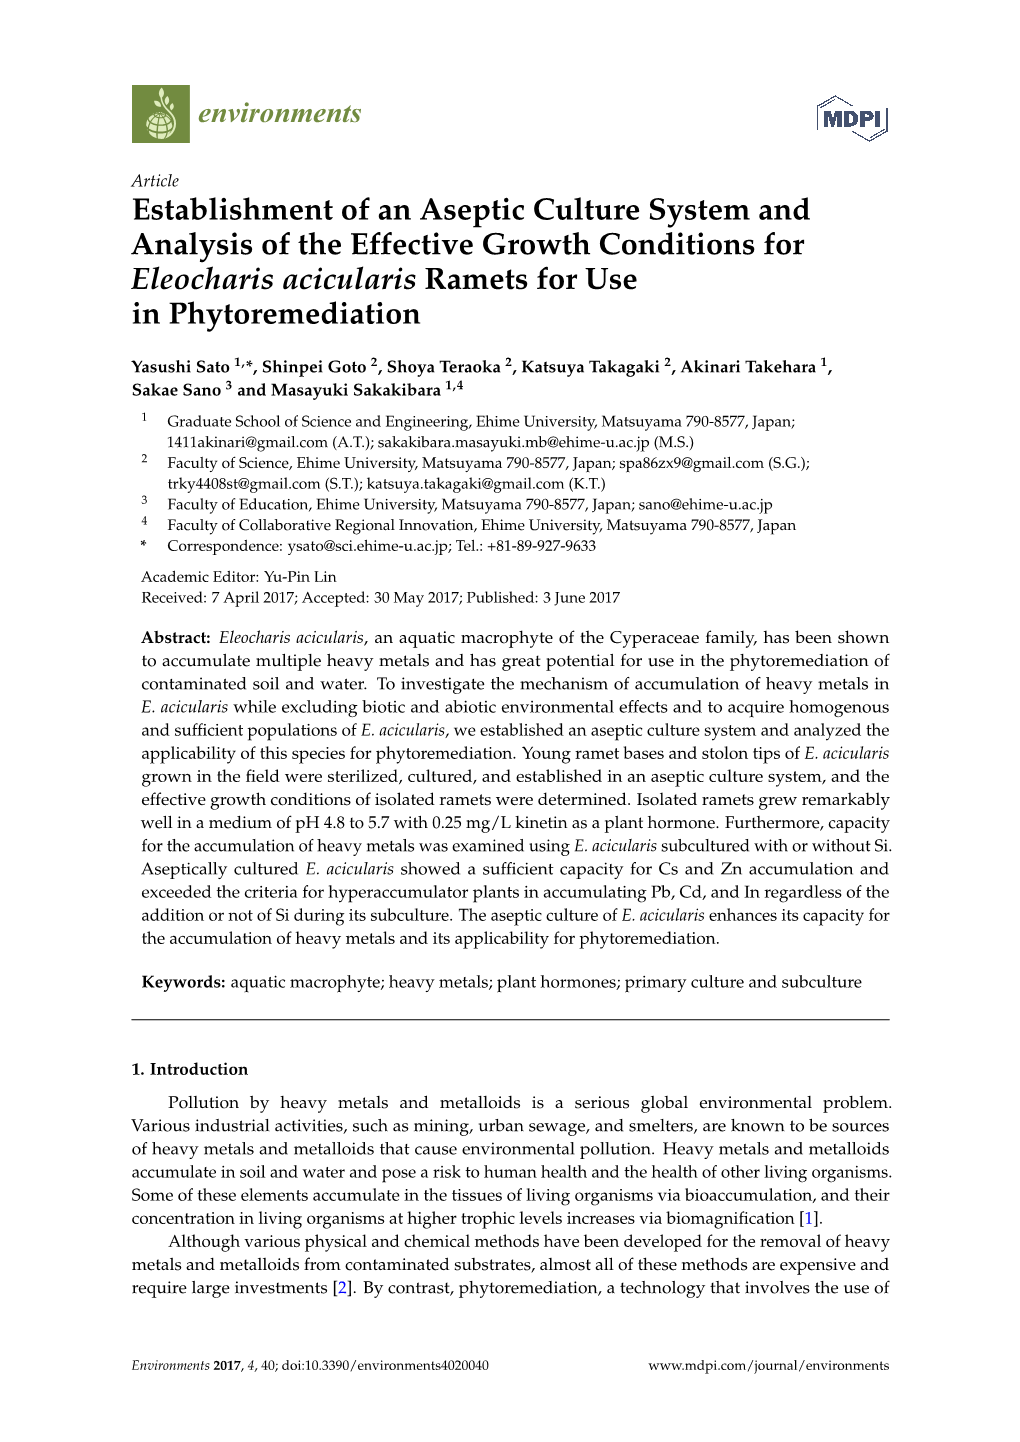 Establishment of an Aseptic Culture System and Analysis of the Effective Growth Conditions for Eleocharis Acicularis Ramets for Use in Phytoremediation